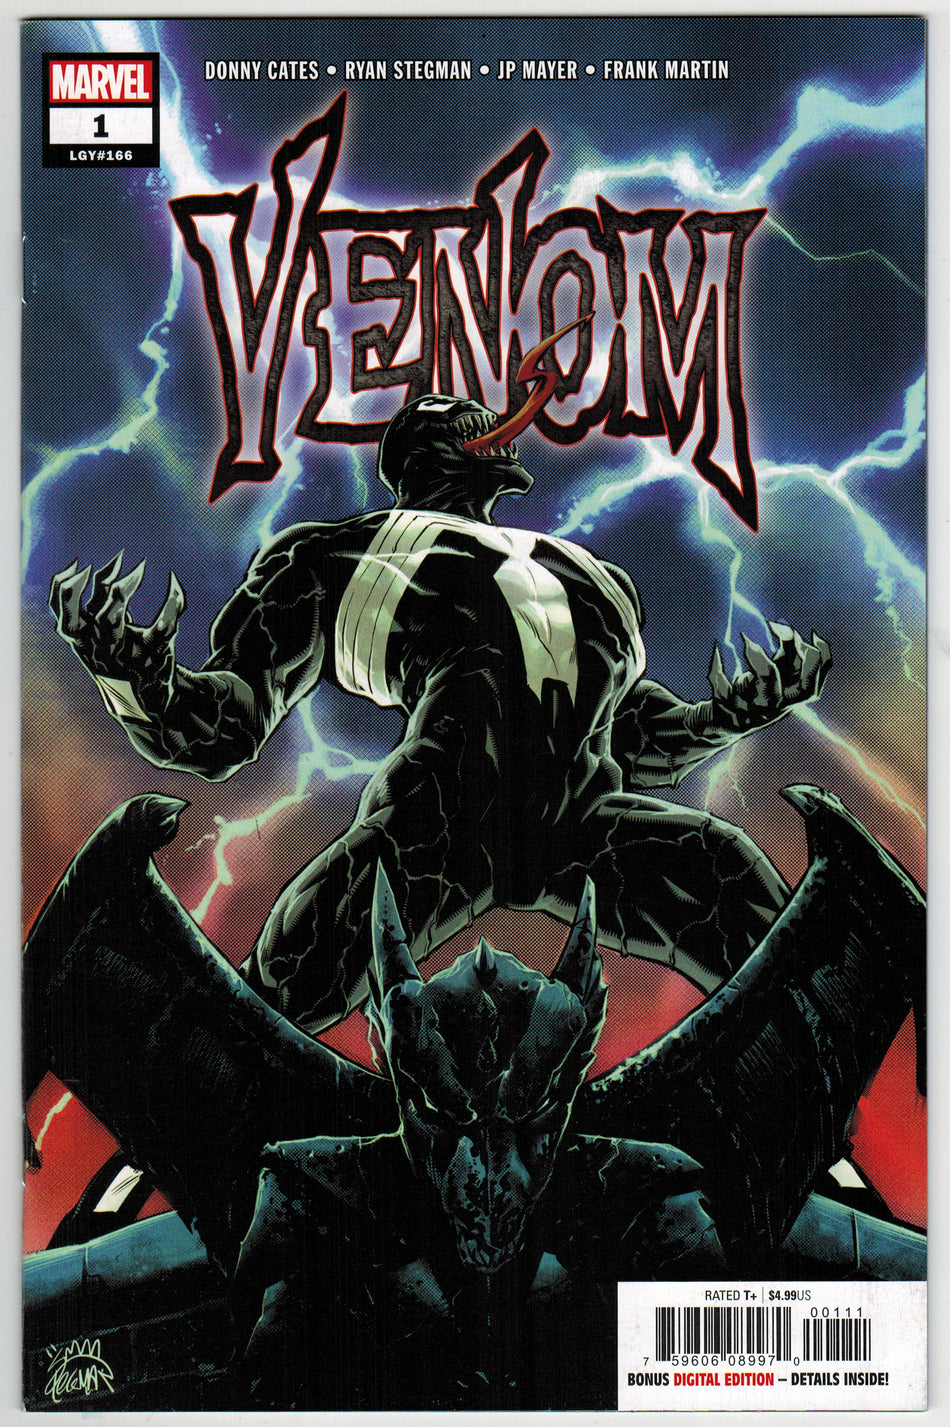 Photo of Venom, Vol. 4 (2018) Issue 1A - Near Mint Comic sold by Stronghold Collectibles